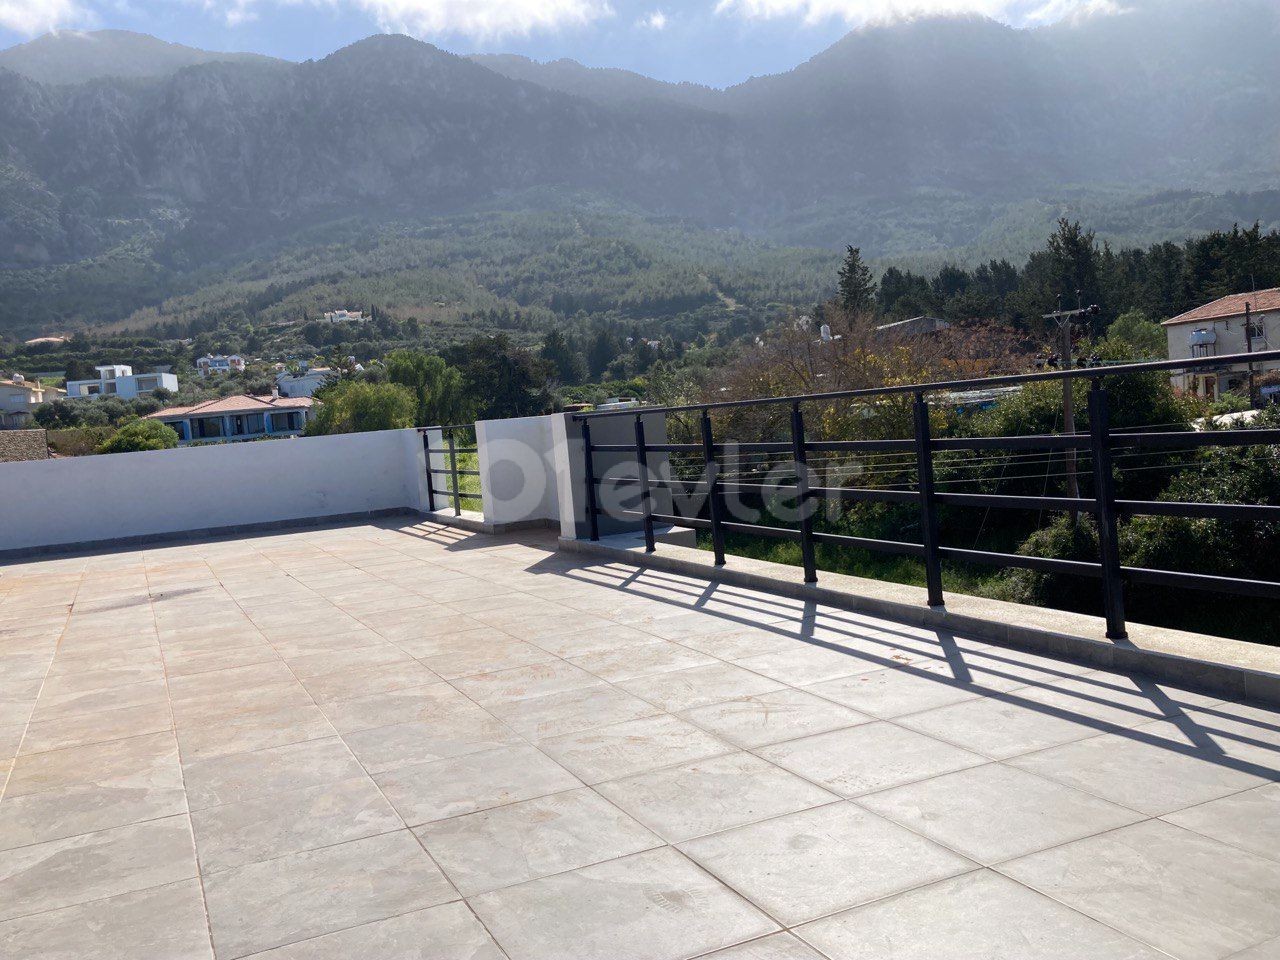 Kyrenia - Lapta, new complex with private terrace, sea and mountain views 2+1 for sale. 